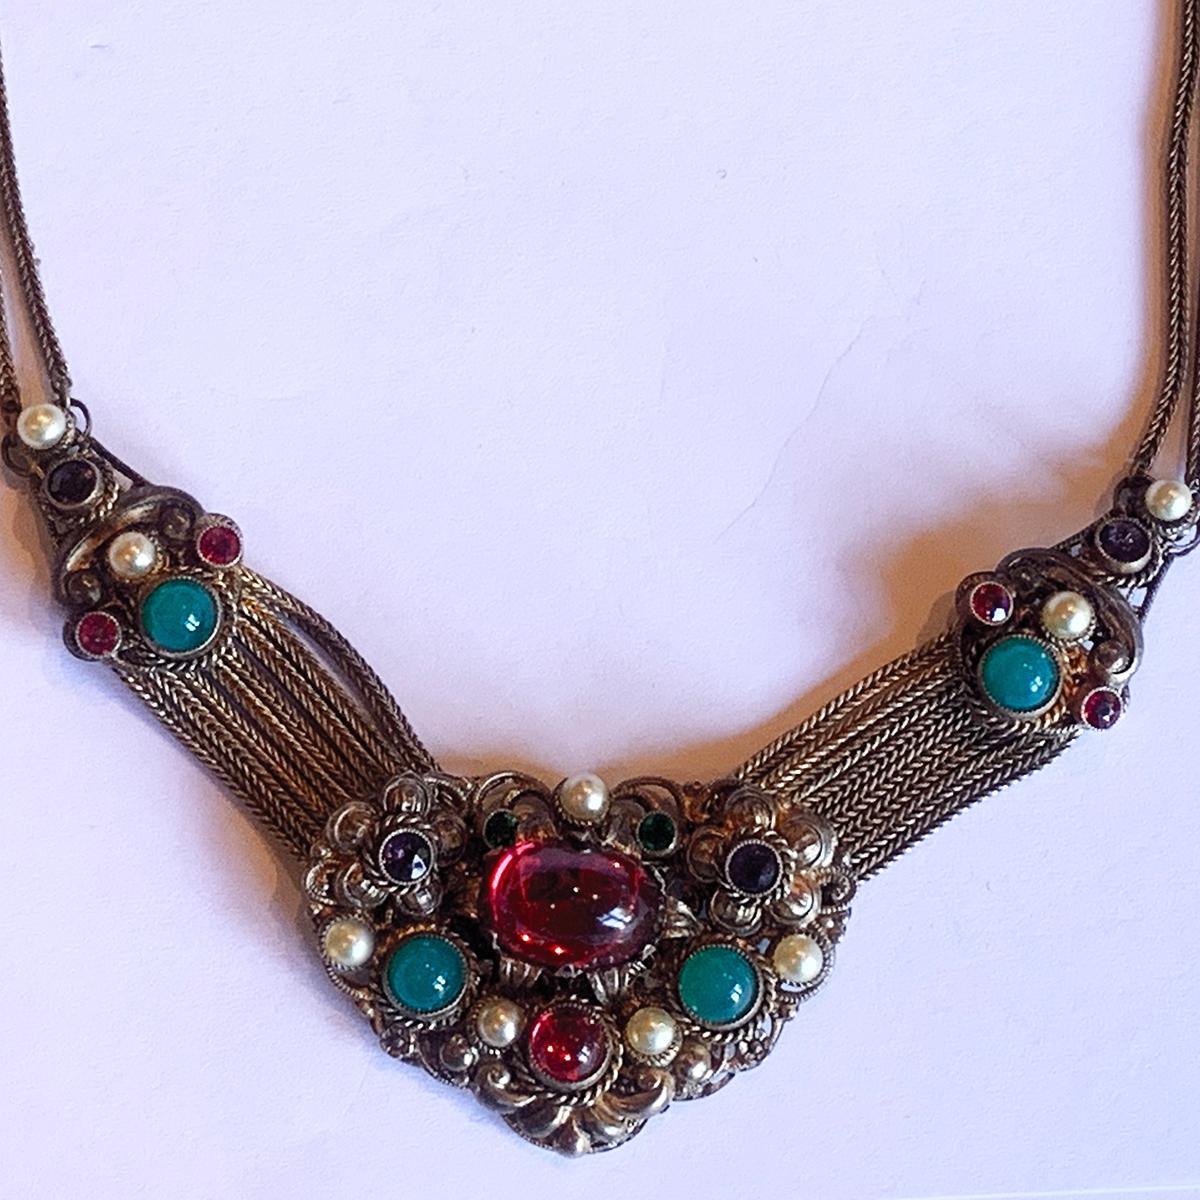 An original Art Deco Czechoslovakian “Tutti Frutti” Glass Necklace, intricate gilded design, and Hallmarked “Czechoslovakia” to rear of main pendant. Excellent decoration incorporating small “pearls” as highlights and multi fine chains linking